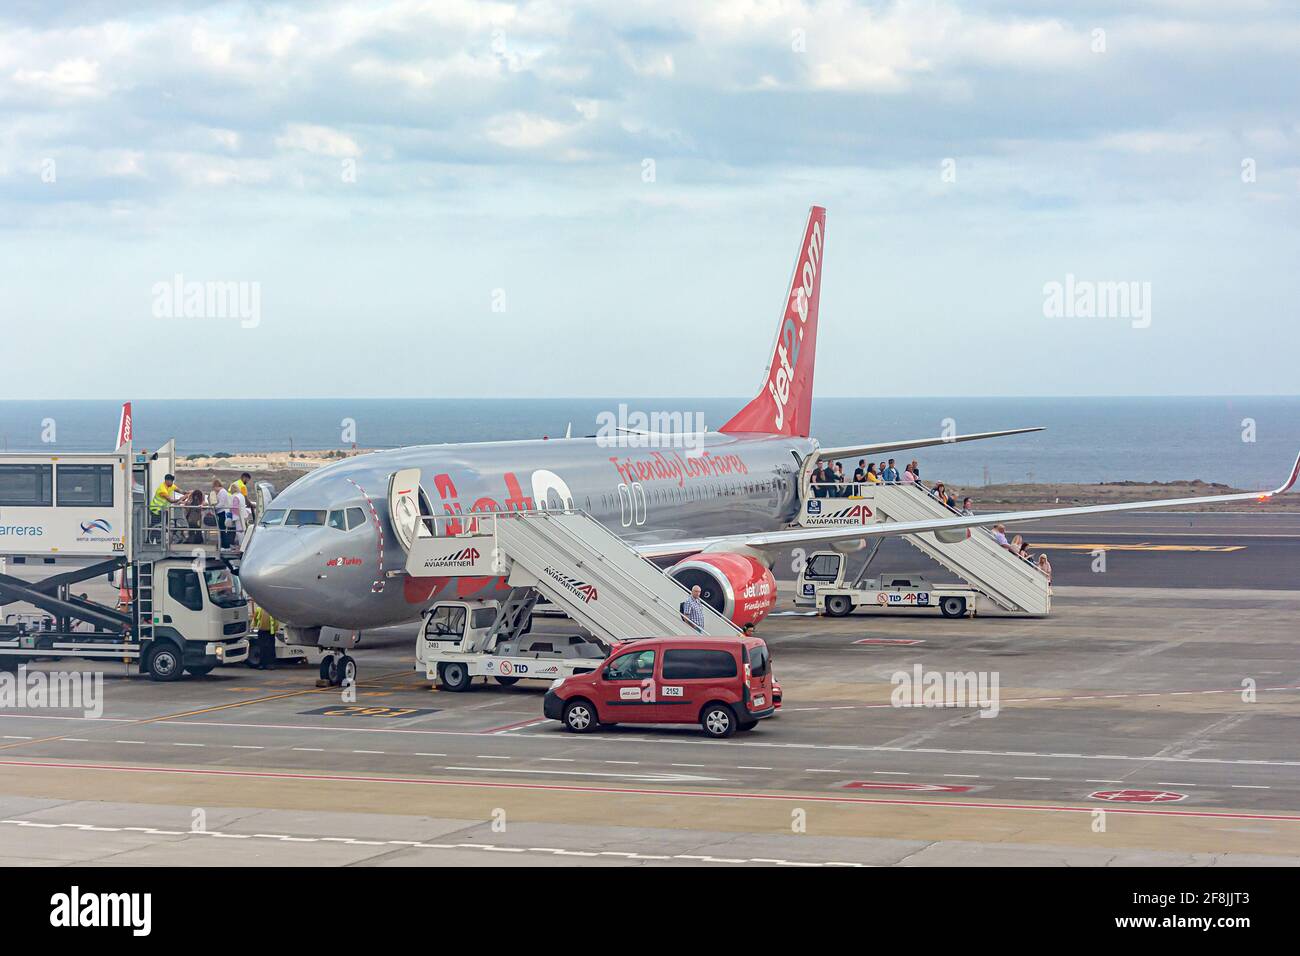 Tenerife, Spain - March 21, 2021: Passengers exit the plane with the inscription Friendly Low Fares. Stock photo. Stock Photo